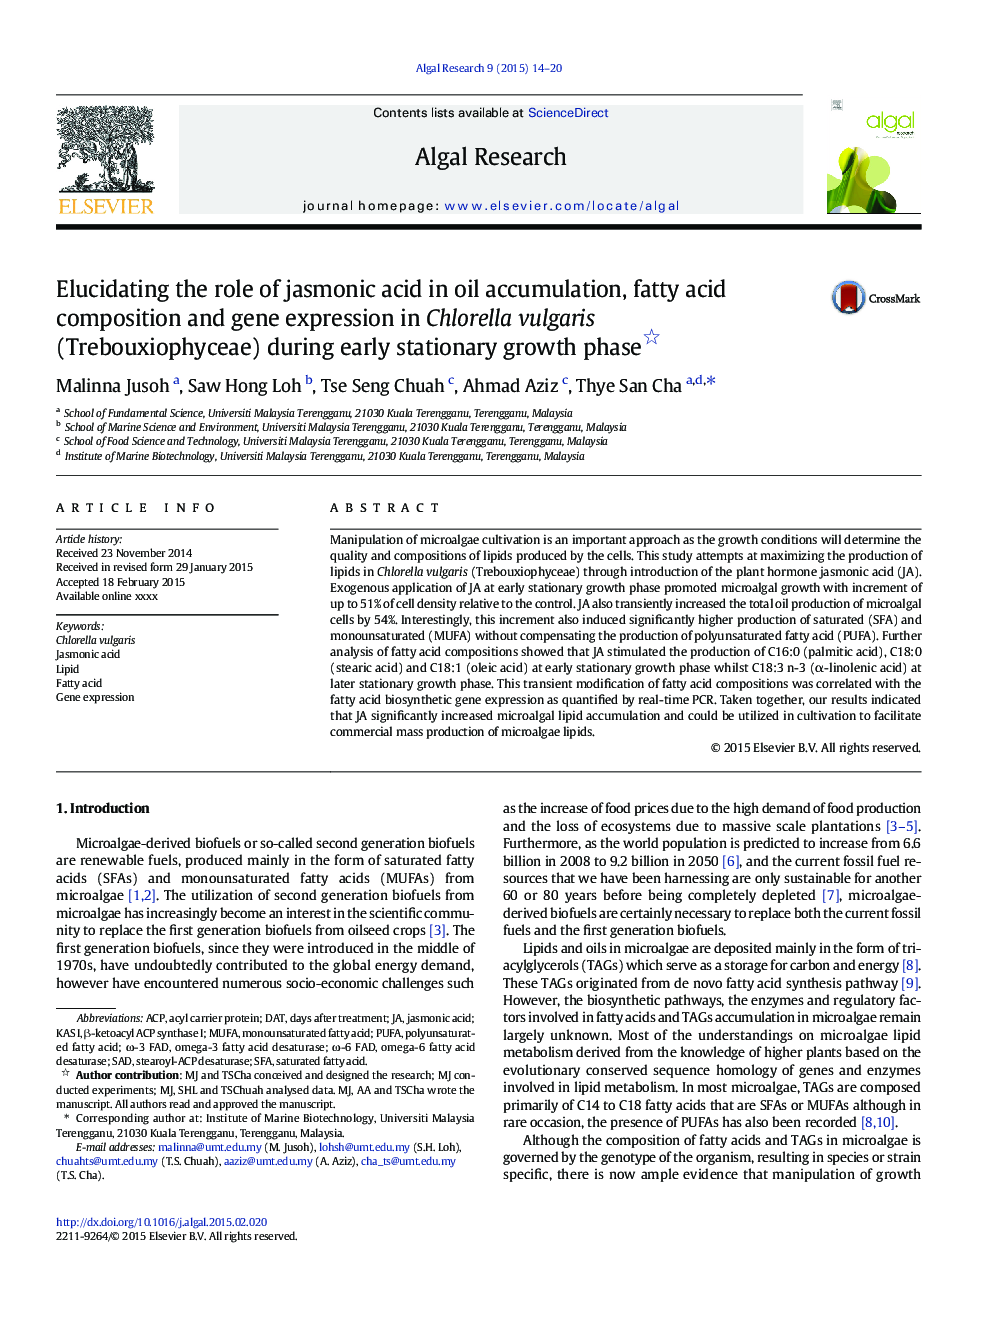 Elucidating the role of jasmonic acid in oil accumulation, fatty acid composition and gene expression in Chlorella vulgaris (Trebouxiophyceae) during early stationary growth phase